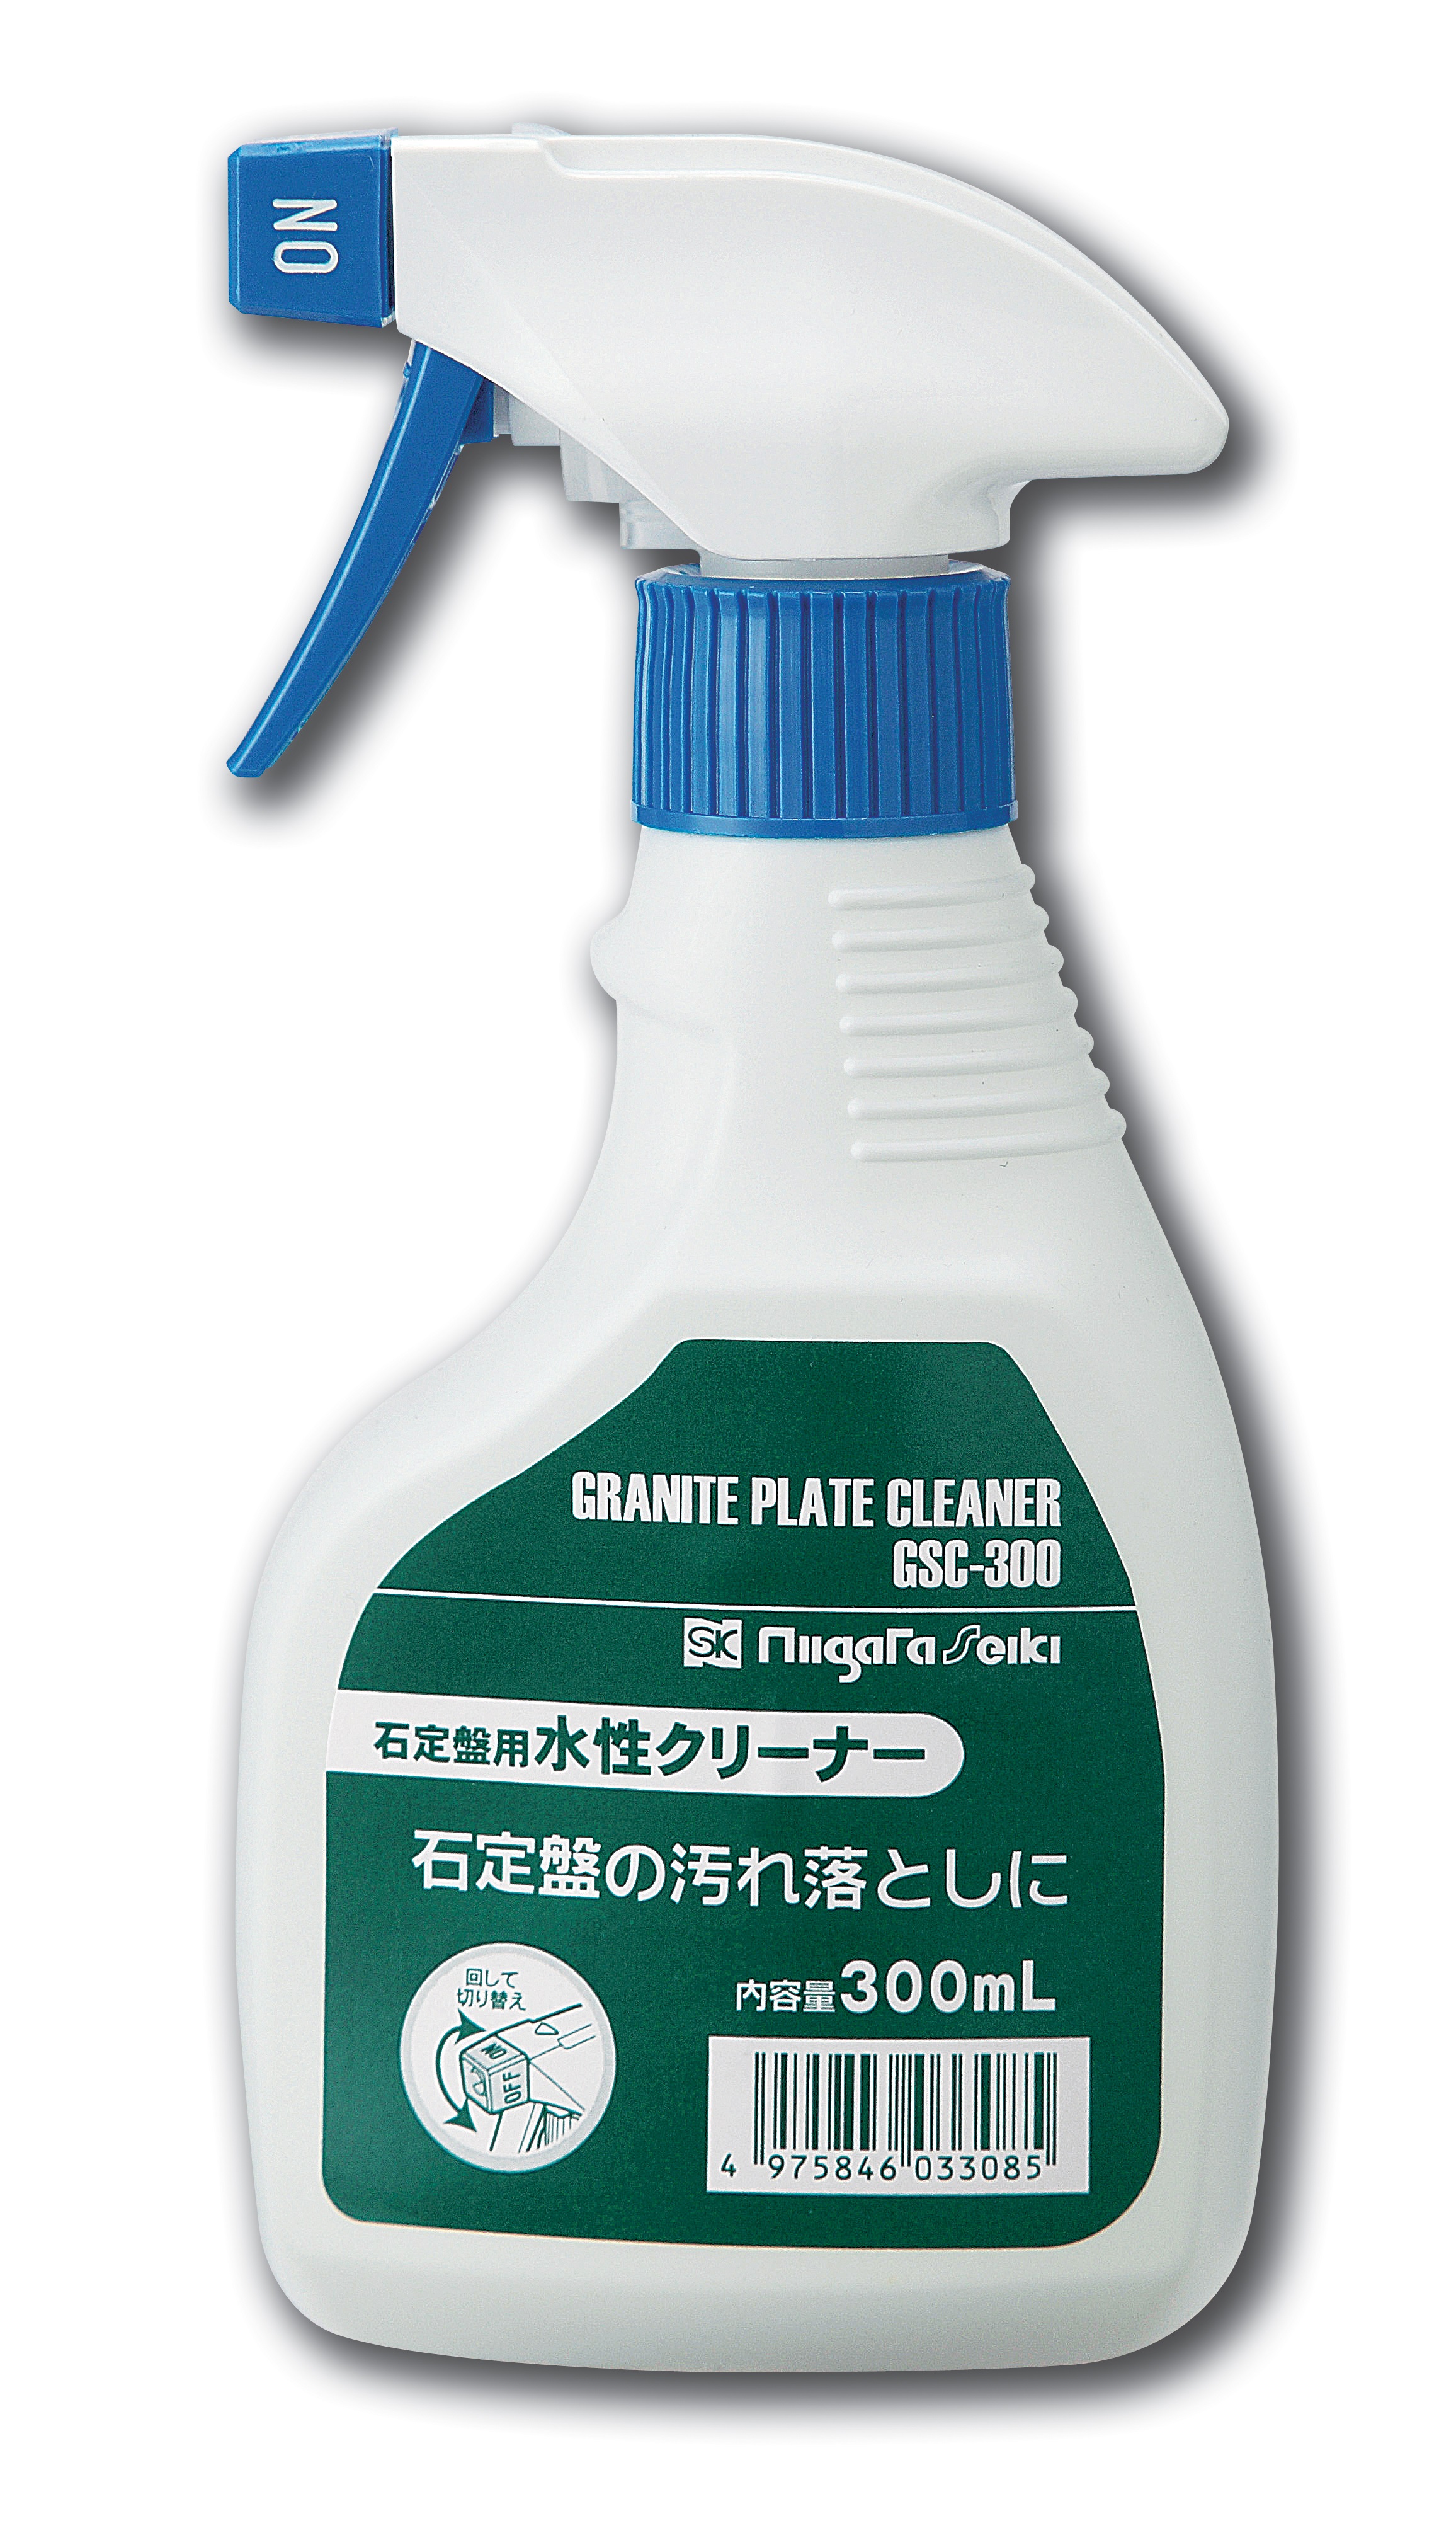 Stone Surface Plate Water Based Cleaner